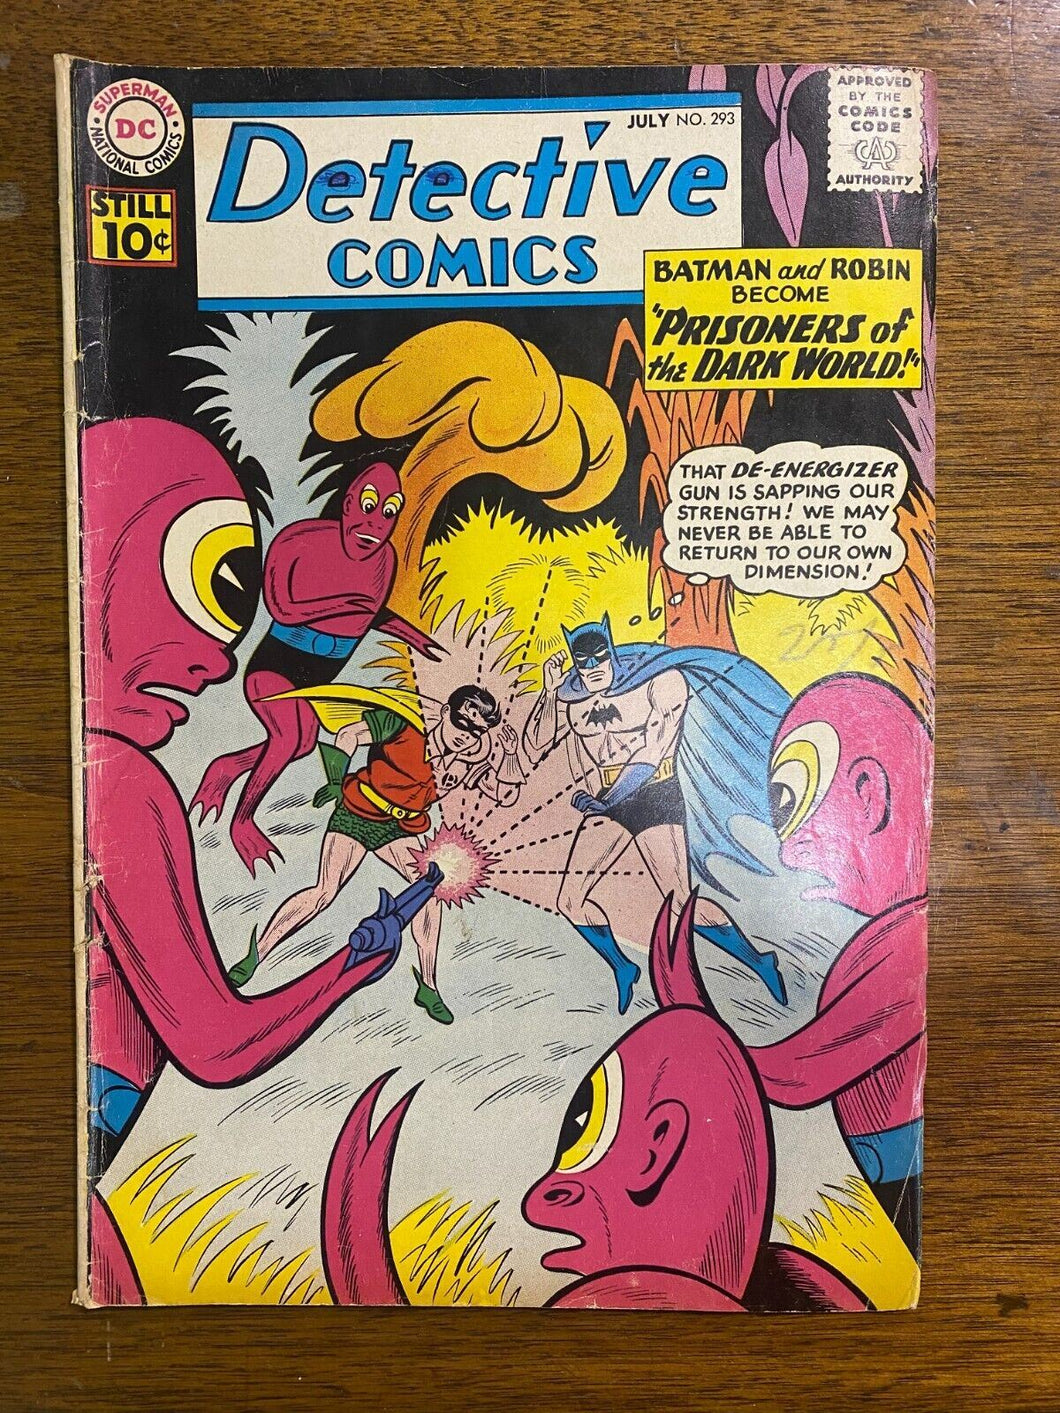 1961 DC Detective Comics Batman and Robin Become Prisoners Issue 293